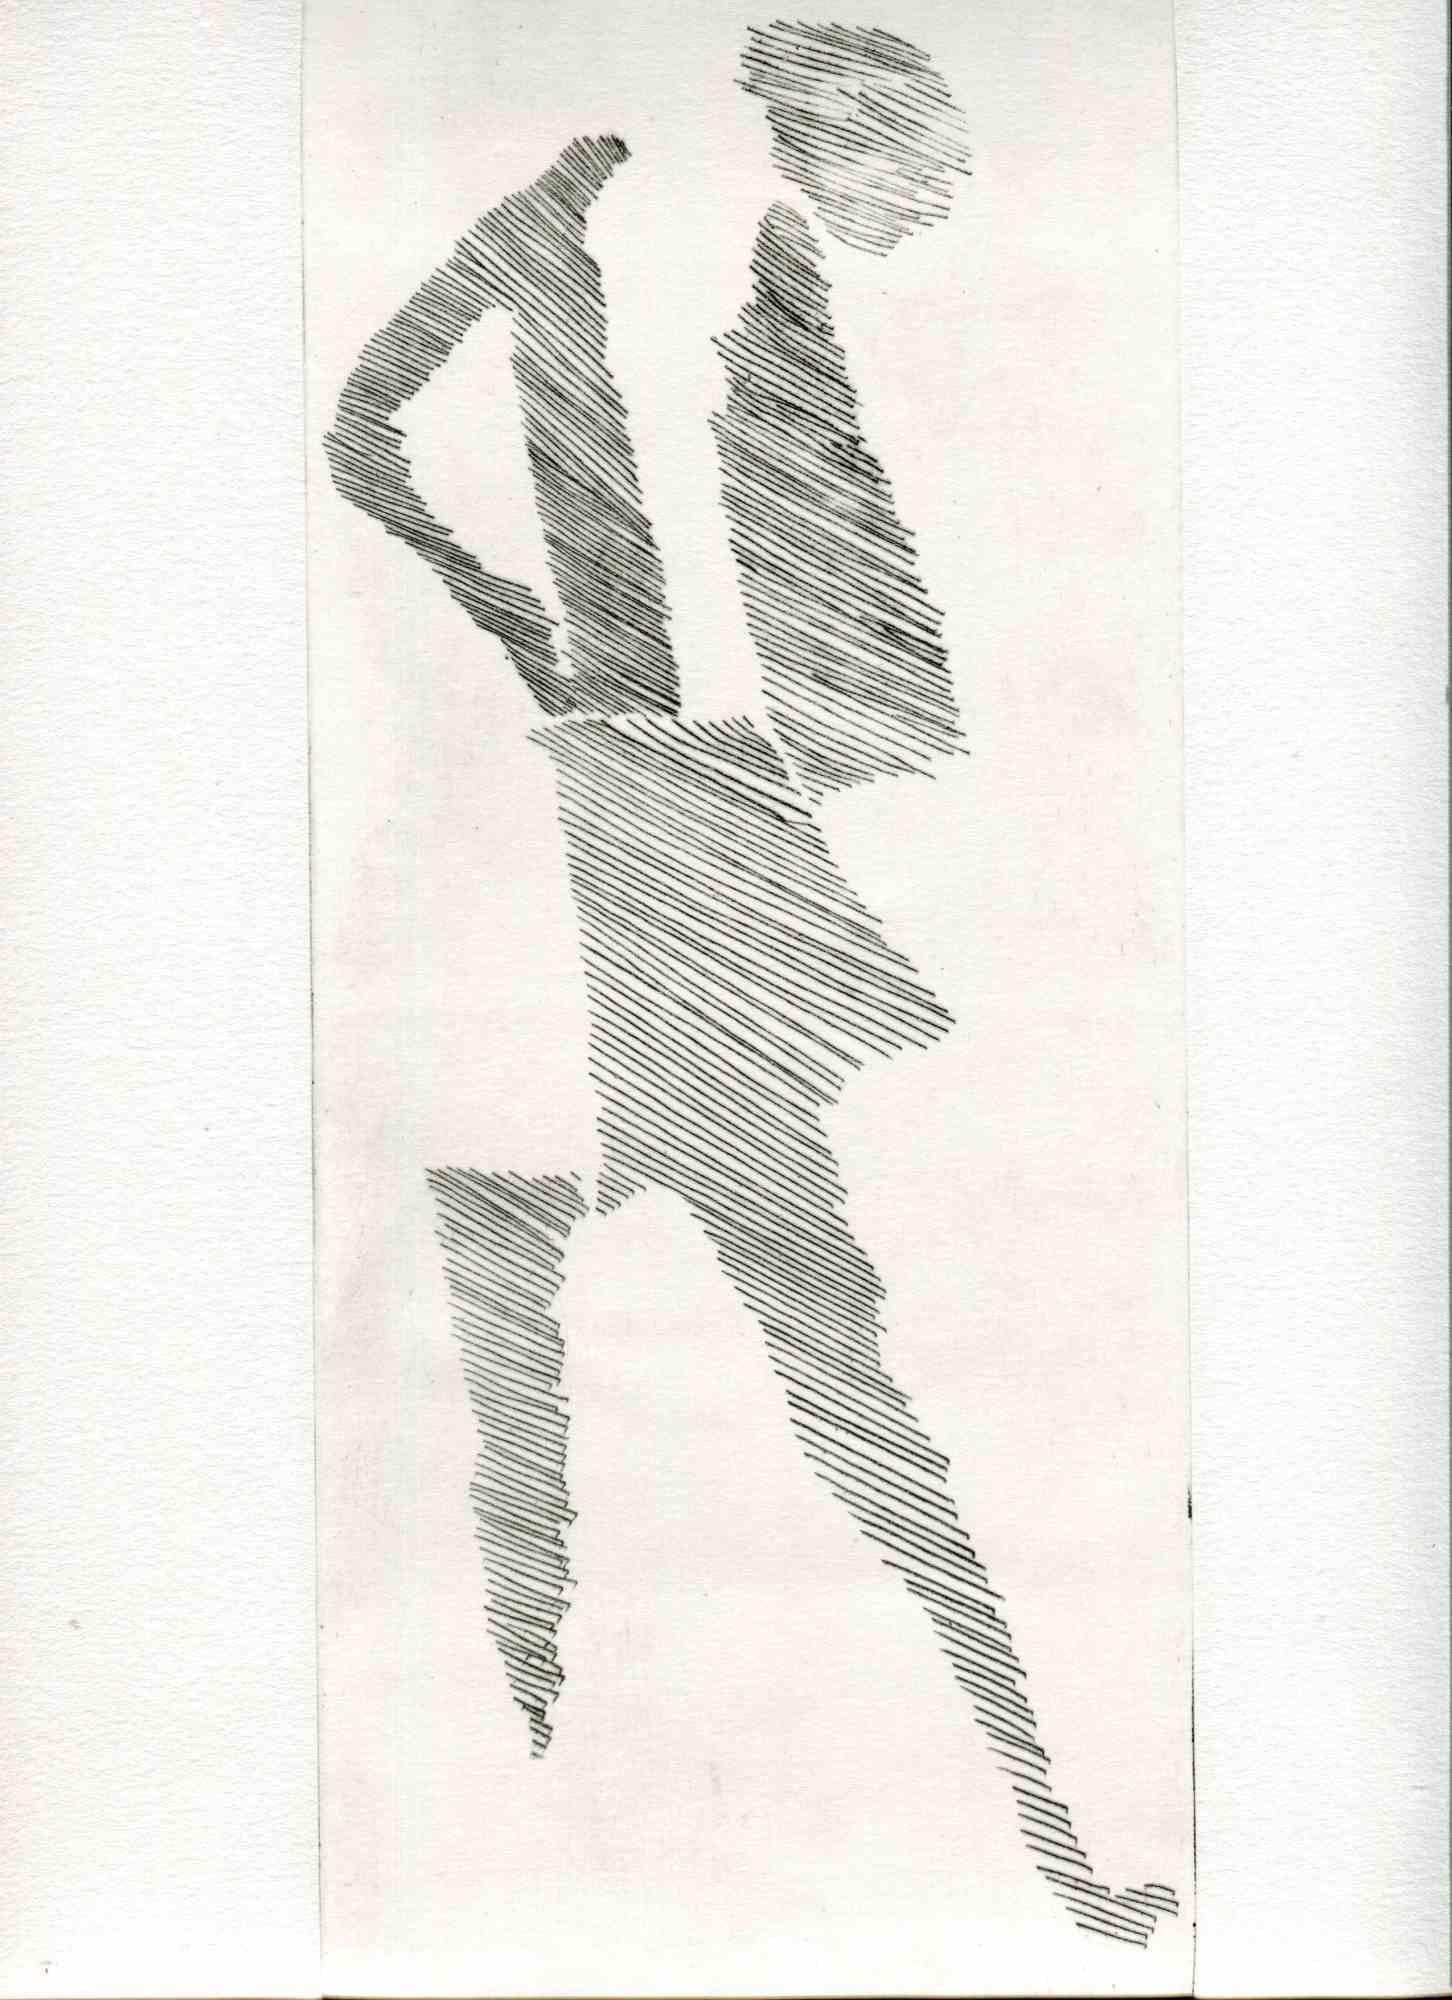 Unknown Figurative Print - Walking Shadow - Original Etching and Drypoint - Mid-20th Century